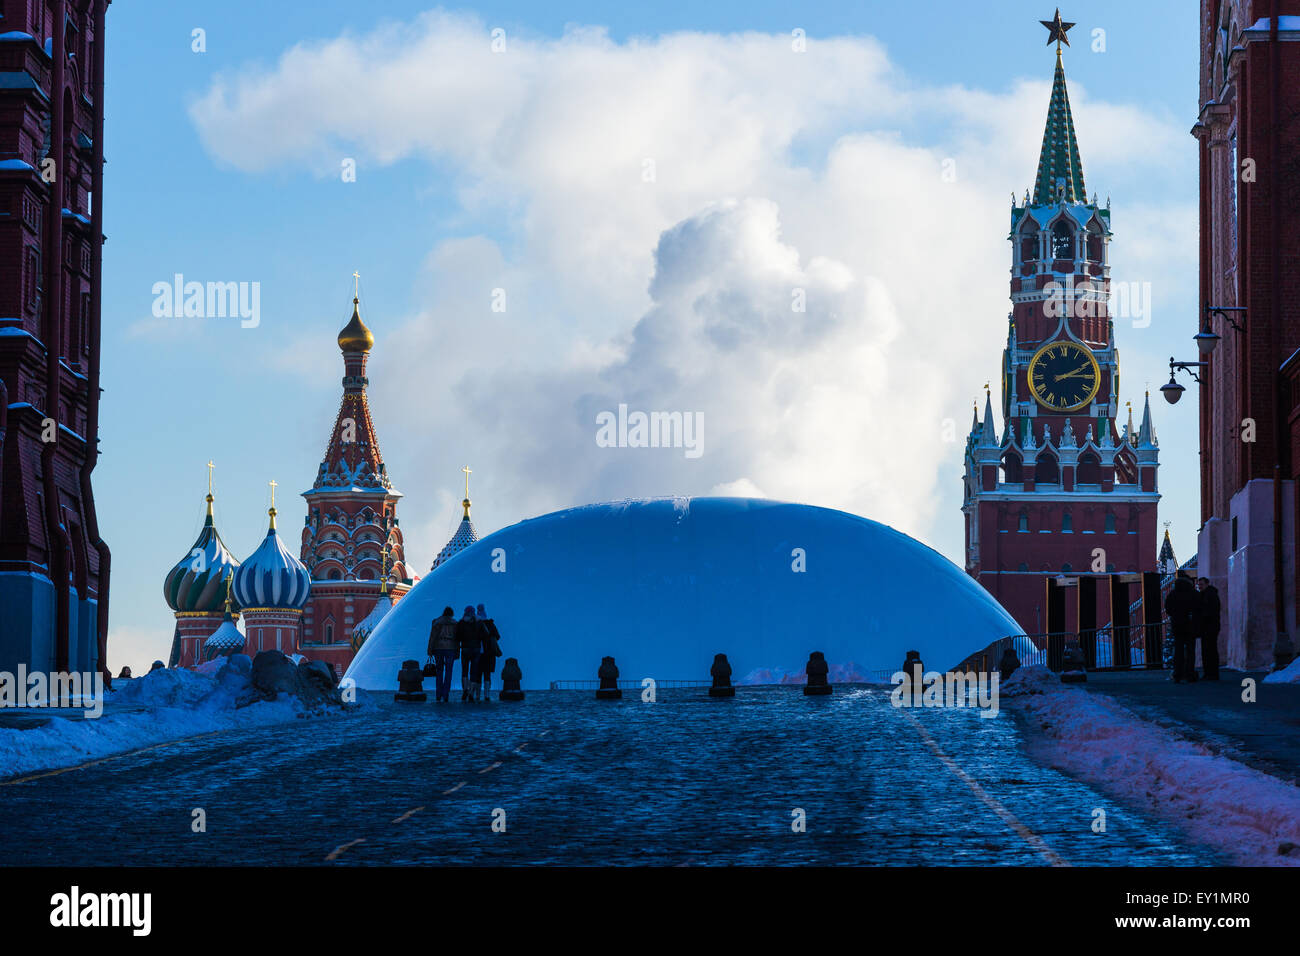 St. Basil's cathedral, Spassky tower of the Kremlin and protective cover over Lenin's mausoleum Stock Photo